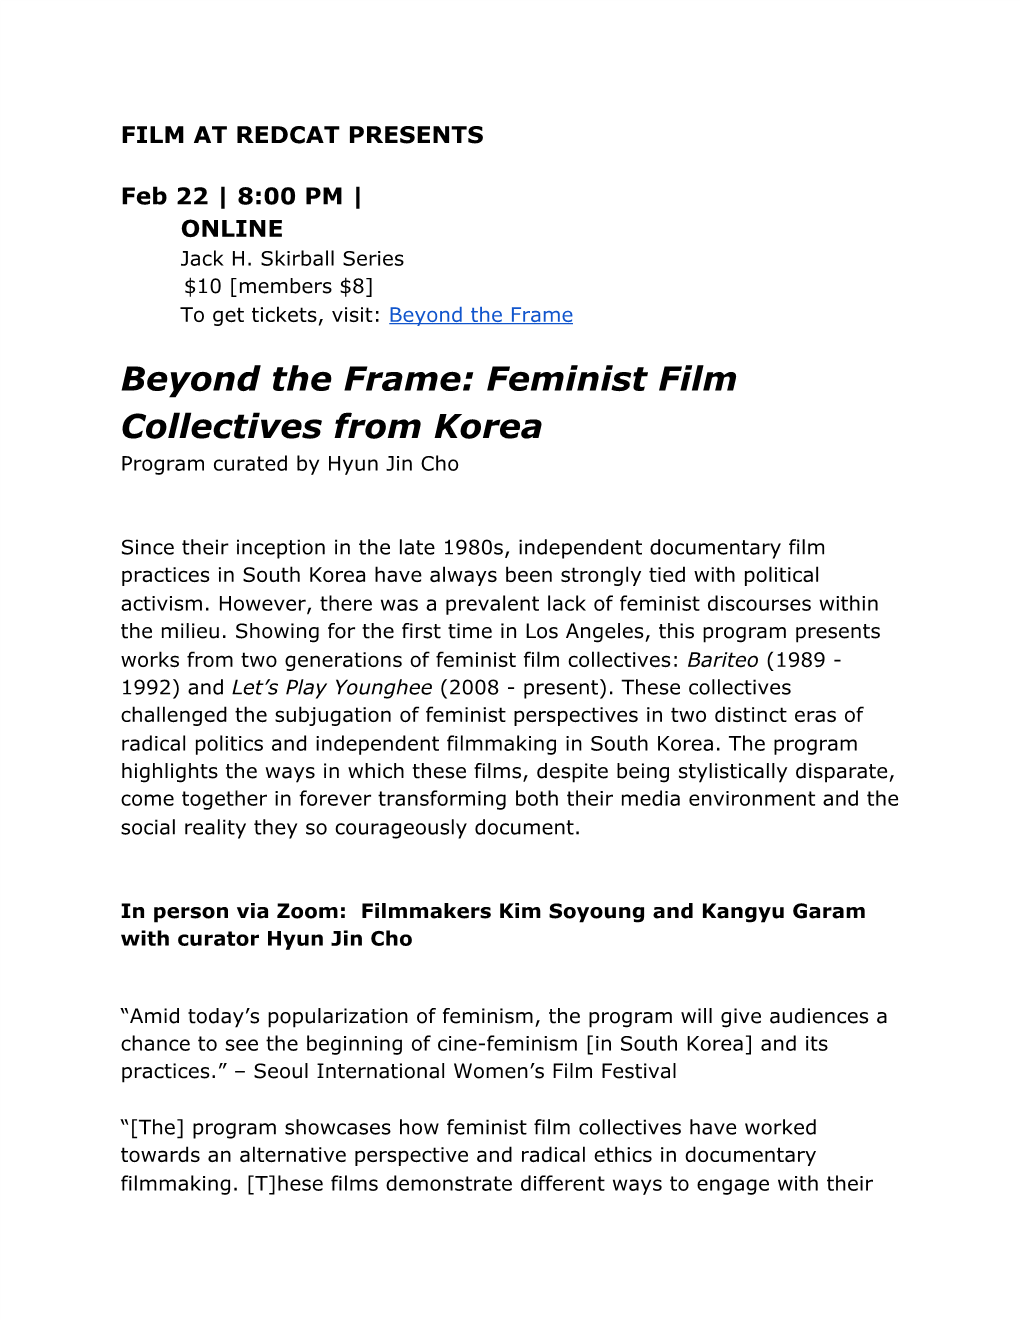 Beyond the Frame: Feminist Film Collectives from Korea